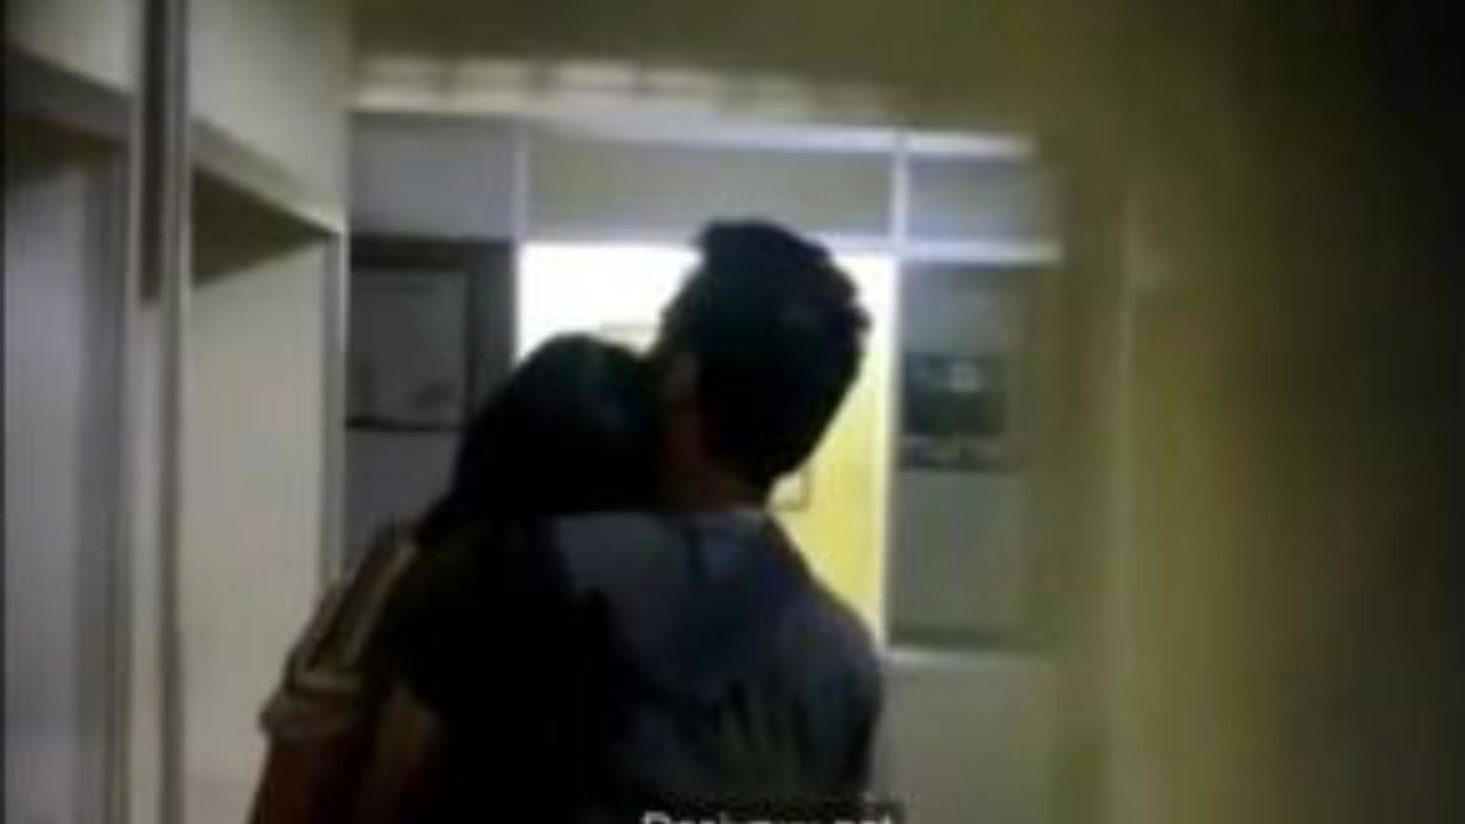 College Lovers Kissing in Store Room, Porn 7a: xHamster Watch College Lovers Kissing in Store Room episode on xHamster, the superlatively good fuck-a-thon tube web resource with tons of free-for-all Indian Men Kissing & Xxx College porn movie scenes